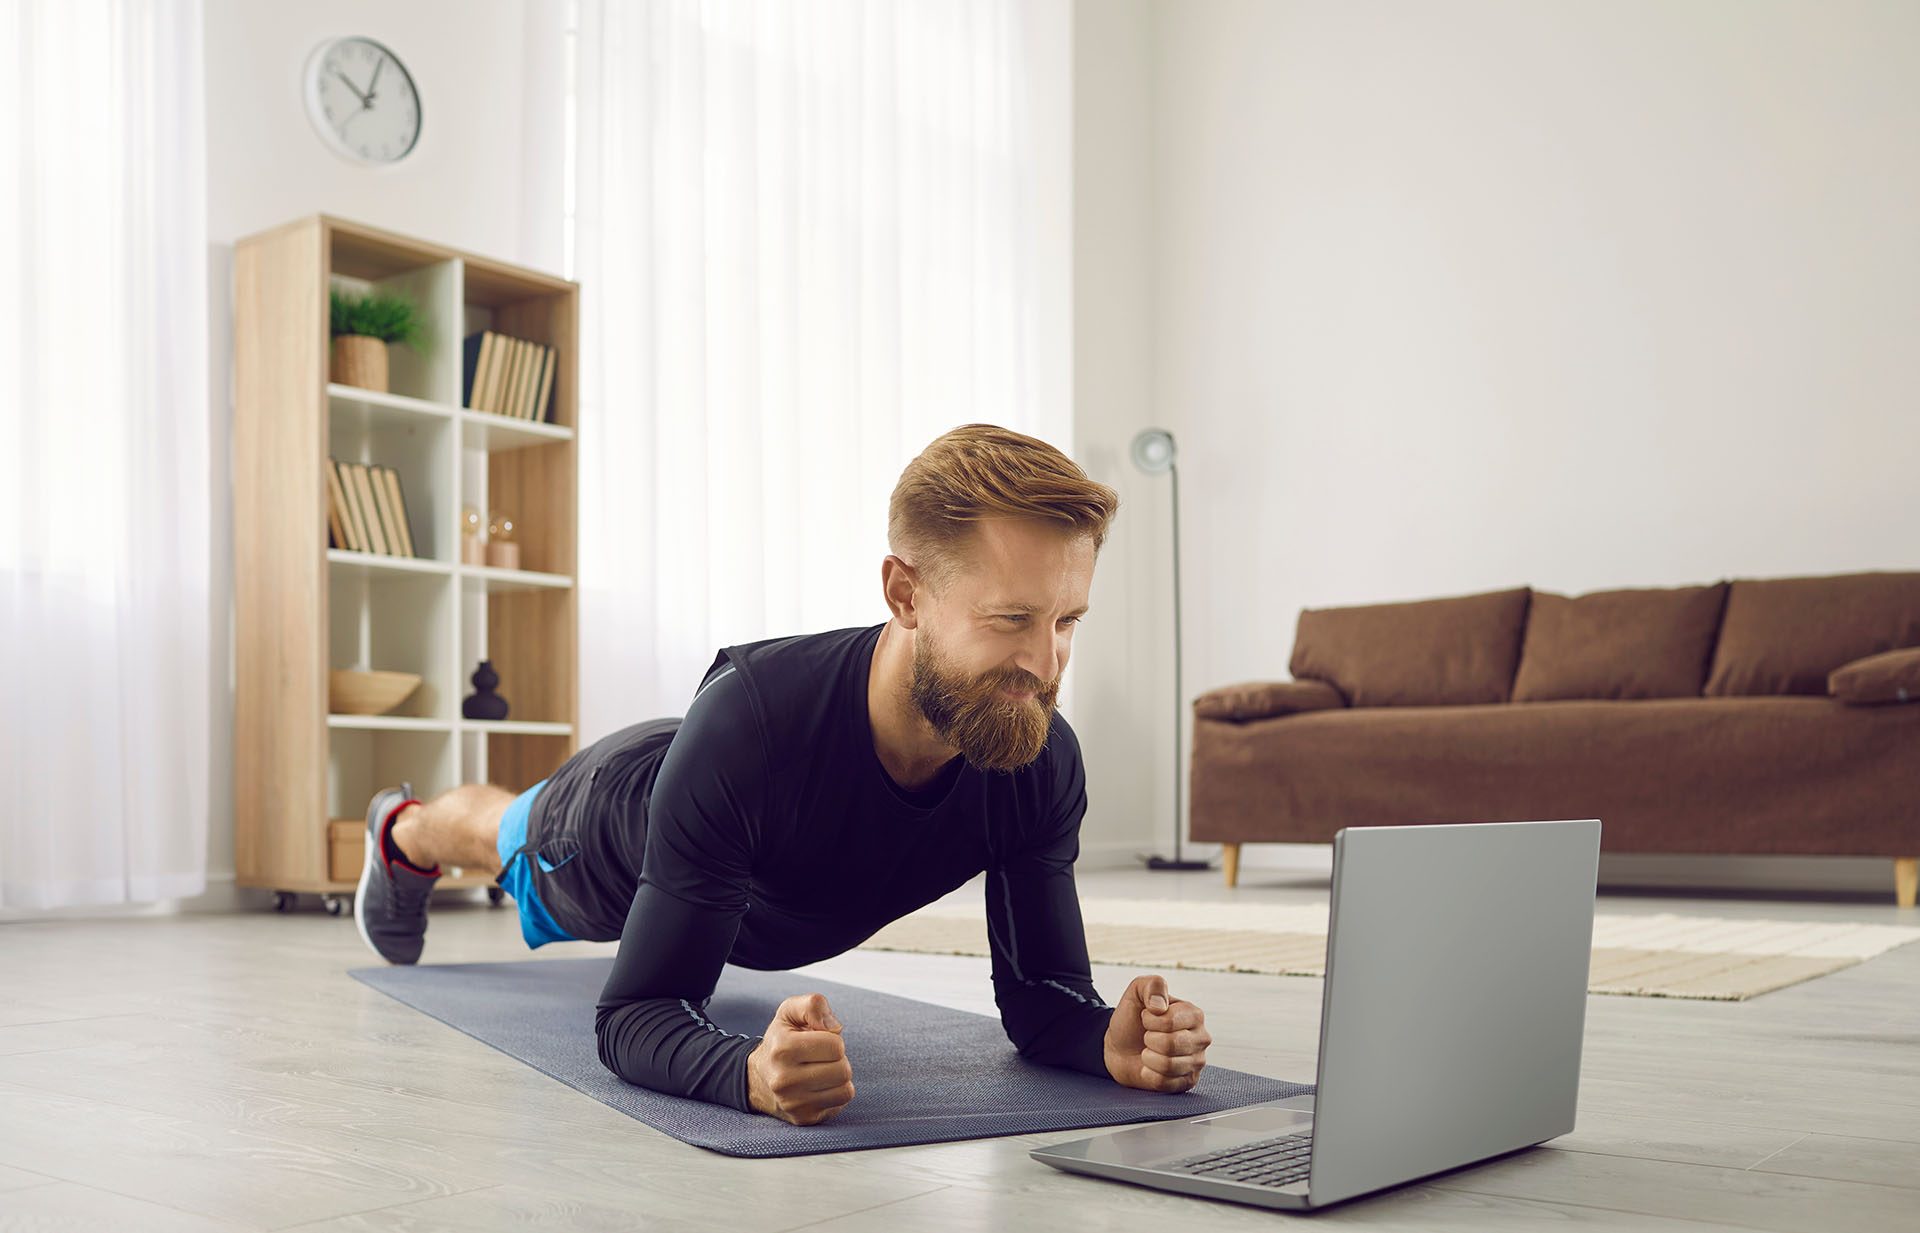 A man doing physical exercises at home while receiving guideance via video.